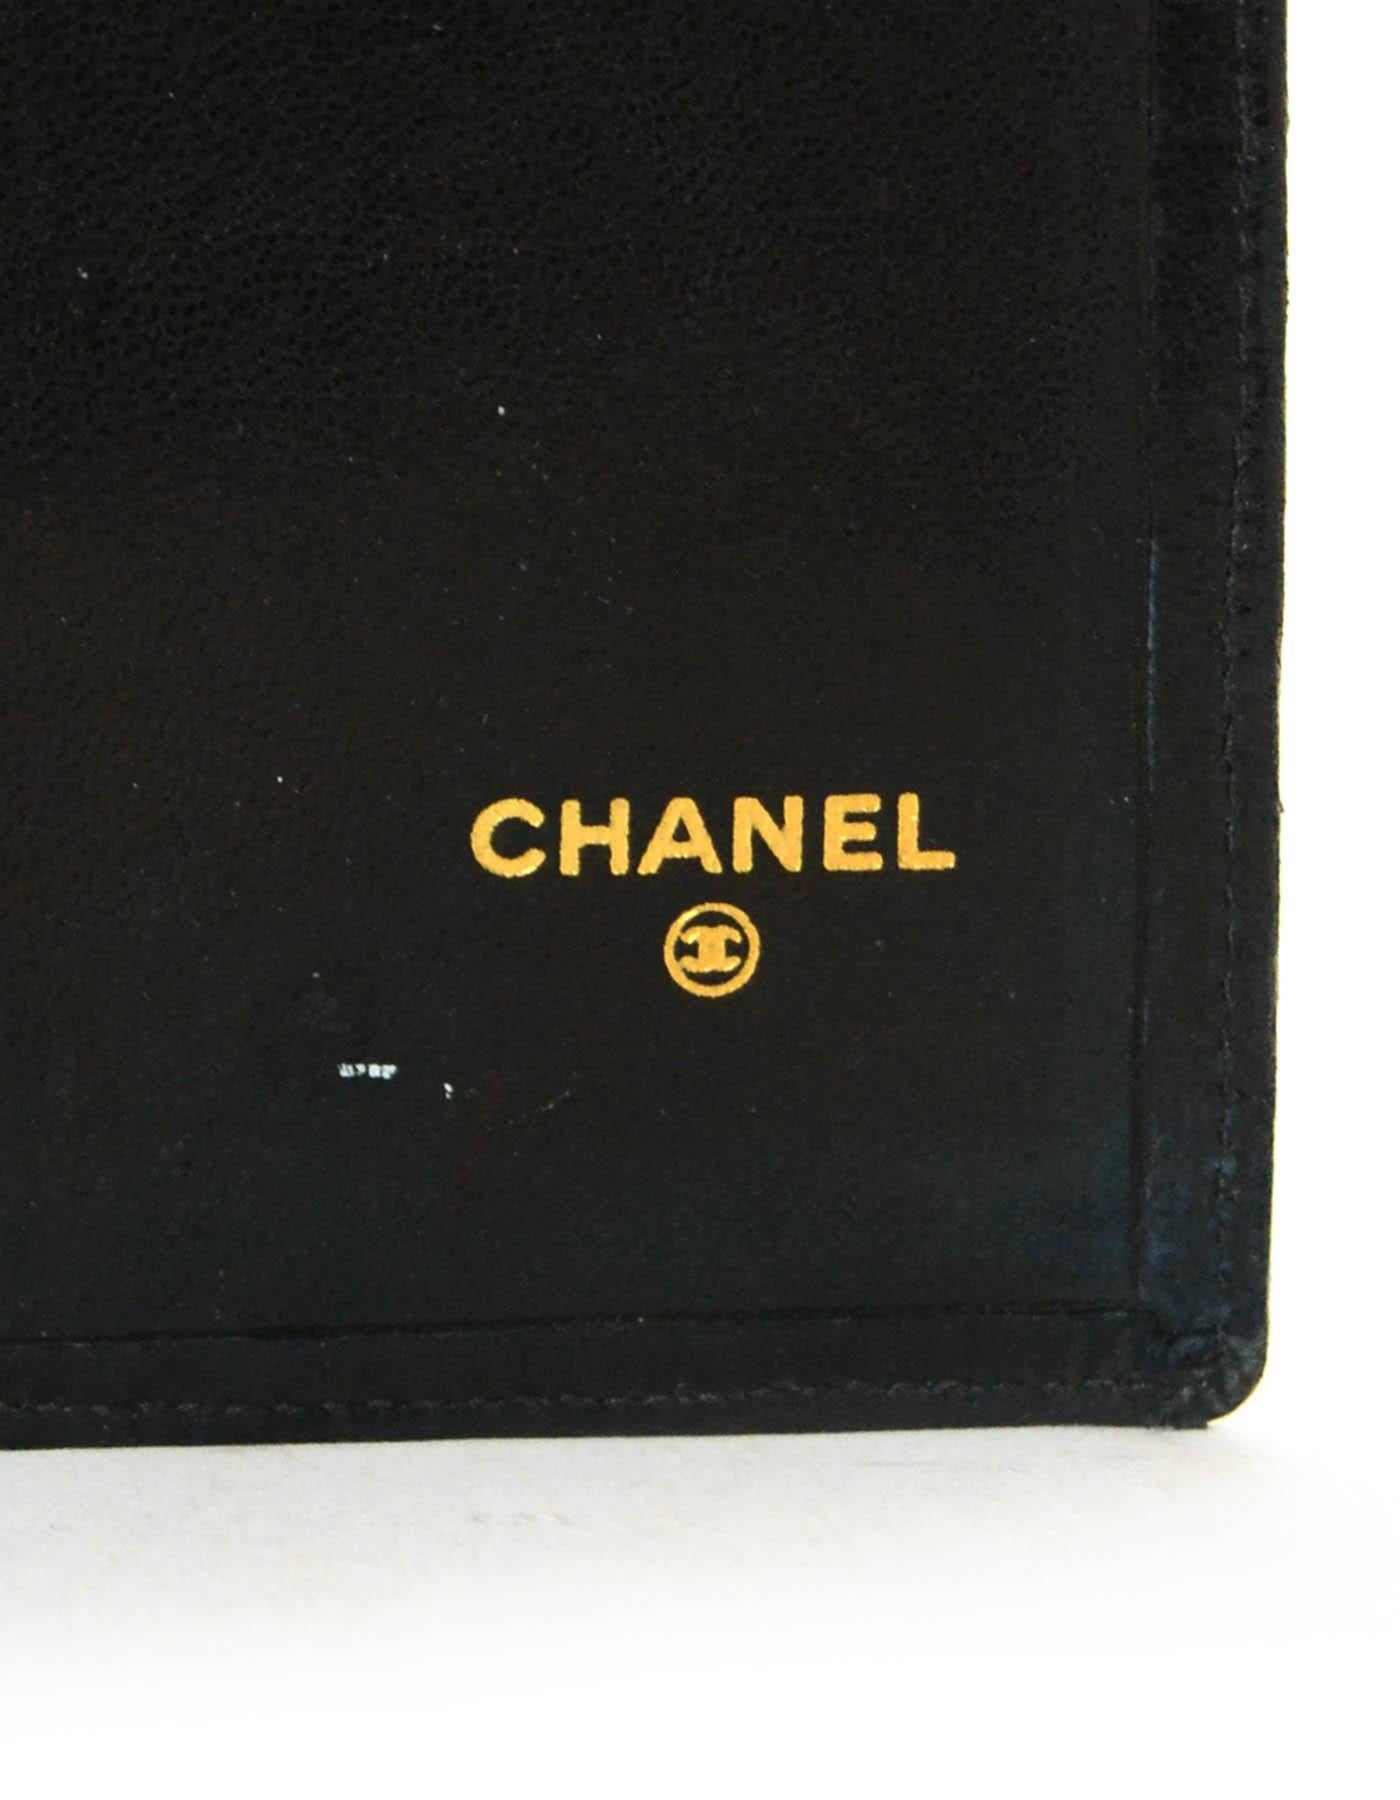 Chanel Vintage Black Leather Quilted Checkbook Cover/Wallet 1